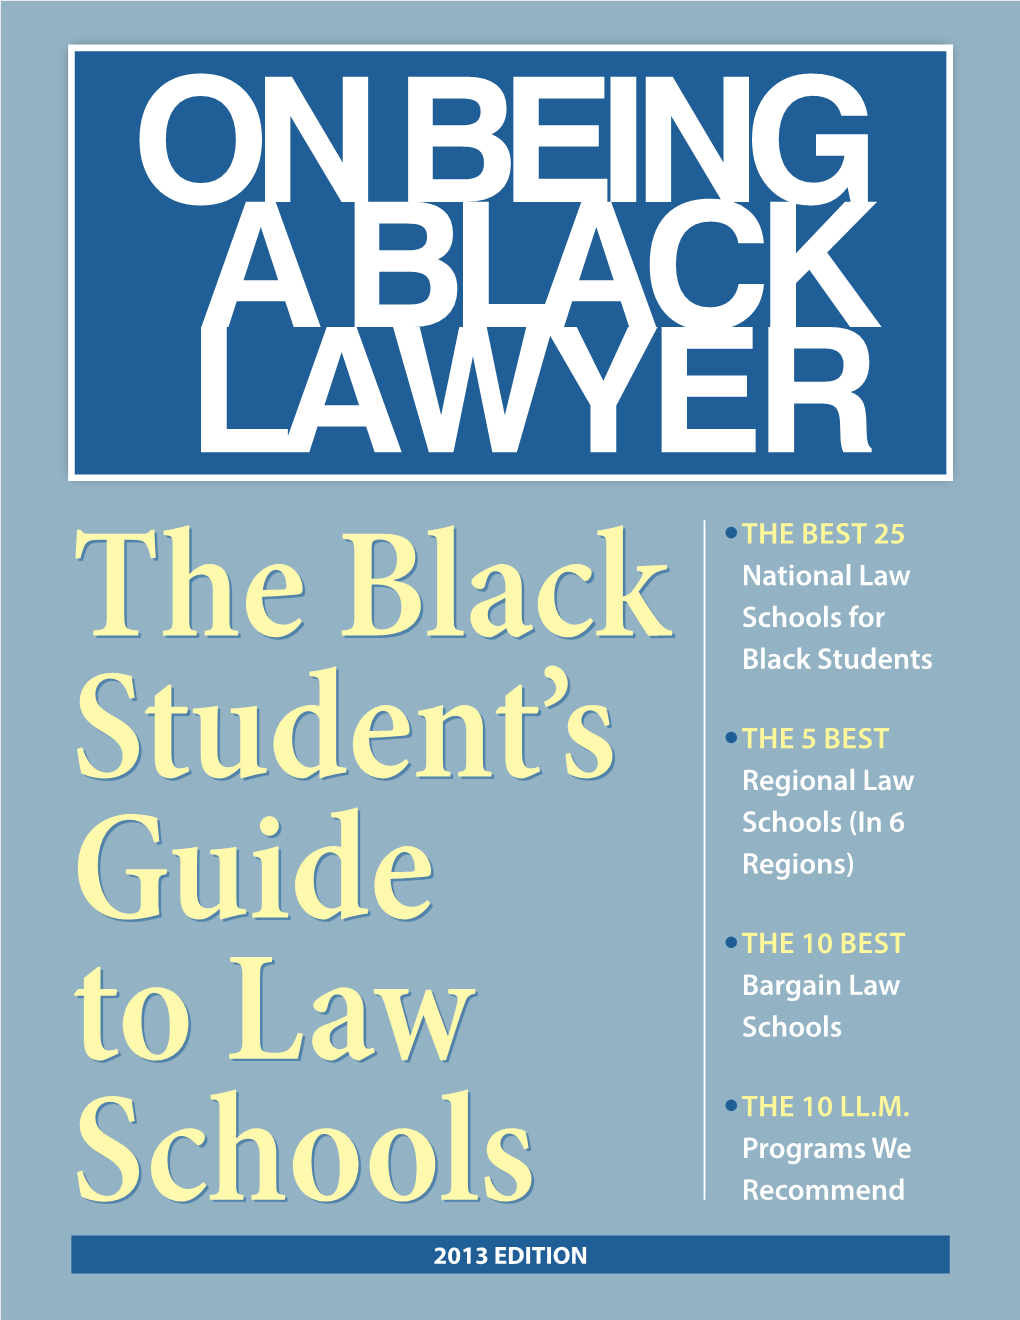 THE BEST 25 National Law Schools for Black Students the 5 BEST